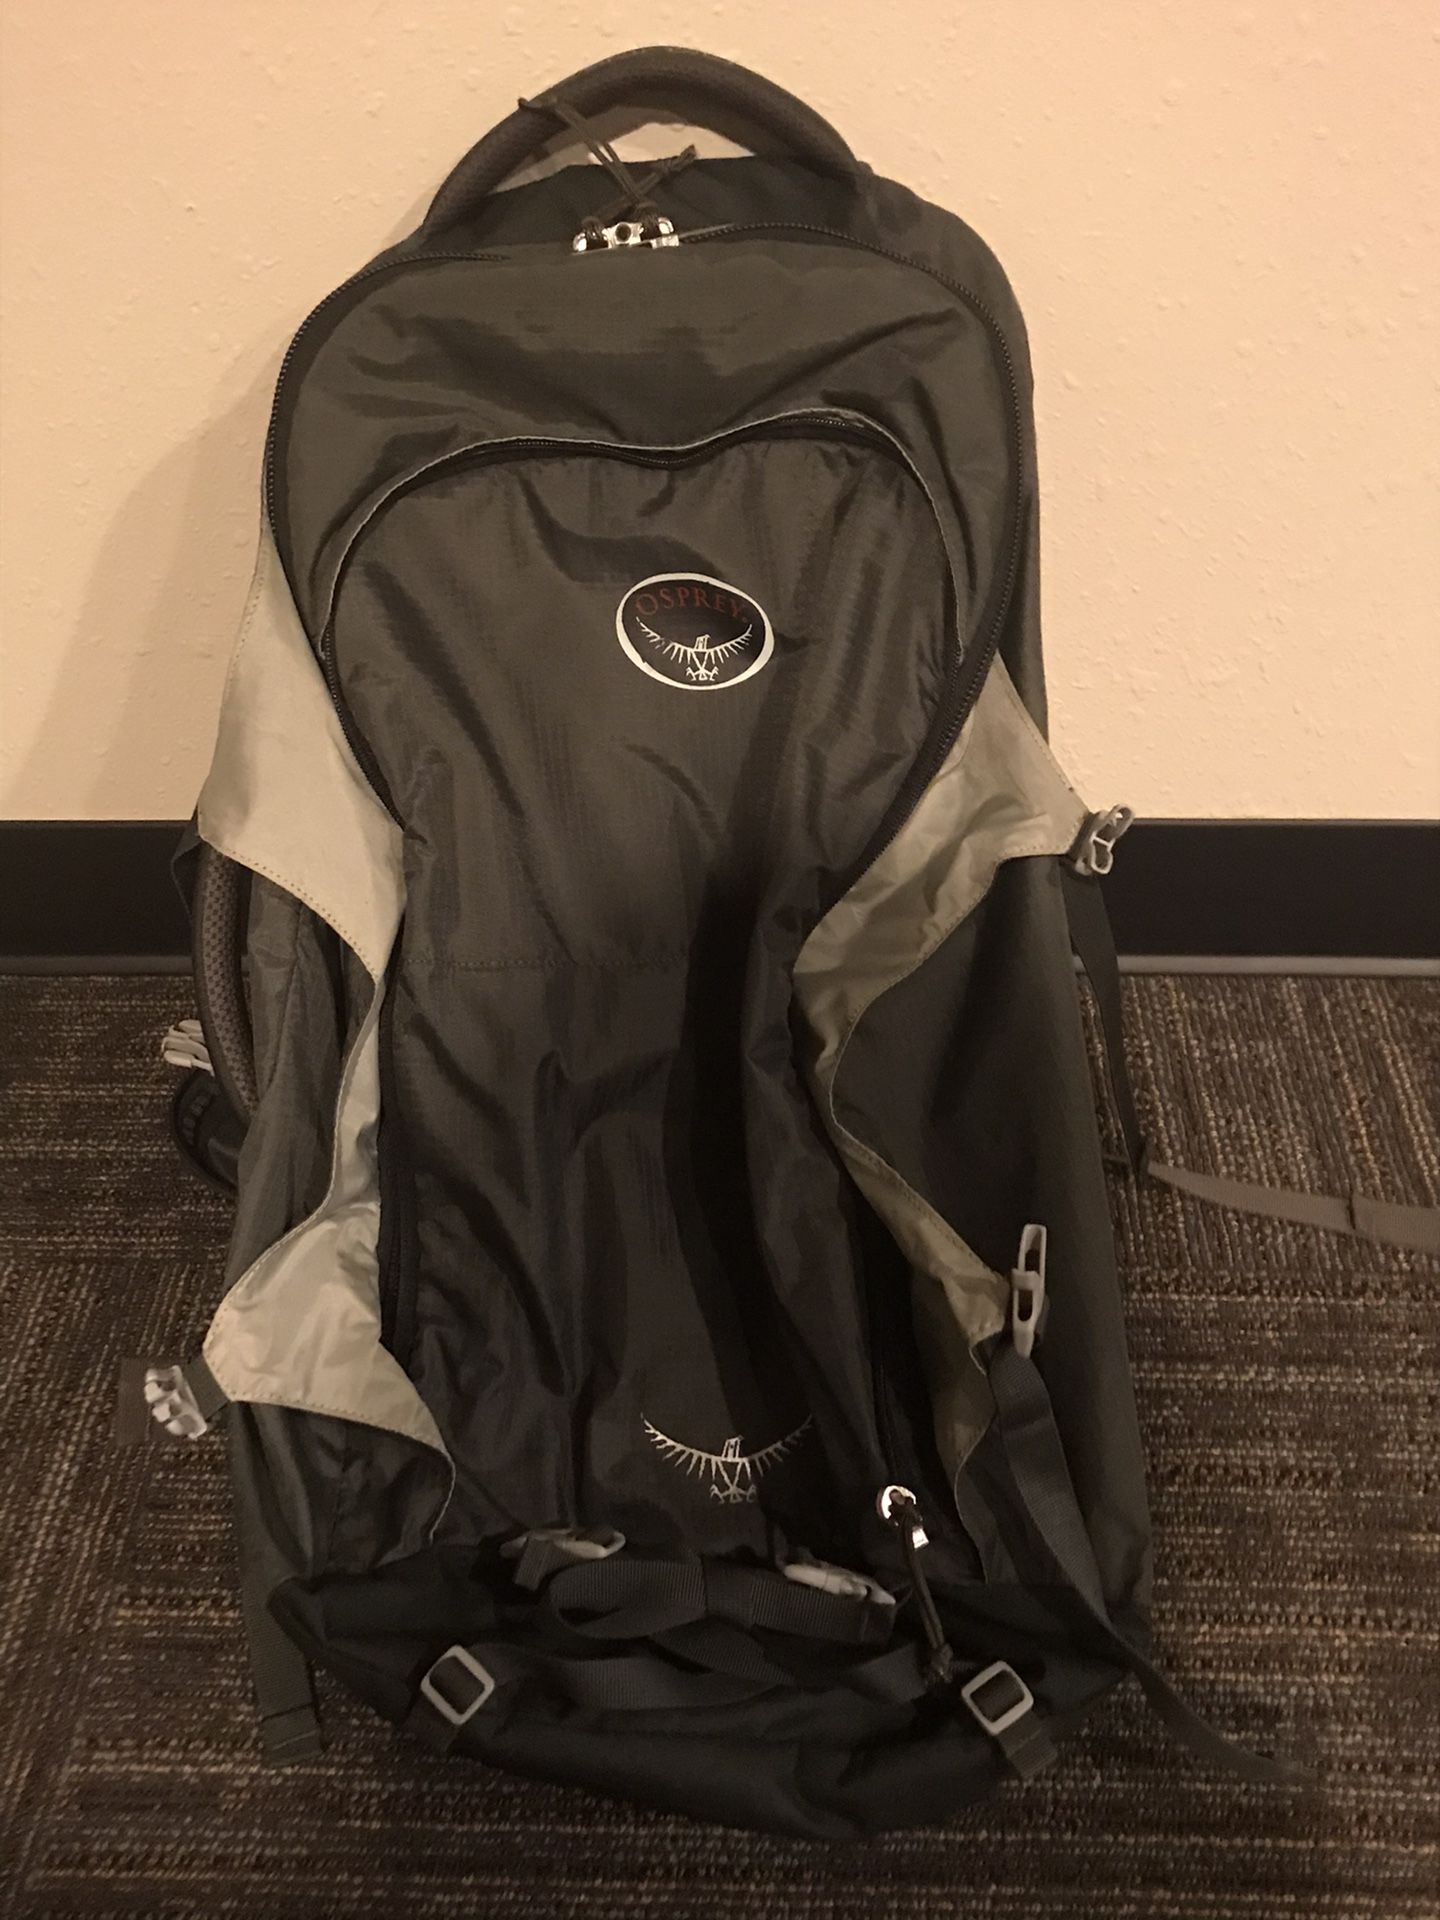 Osprey Farpoint 55L Travel Backpack - No daypack